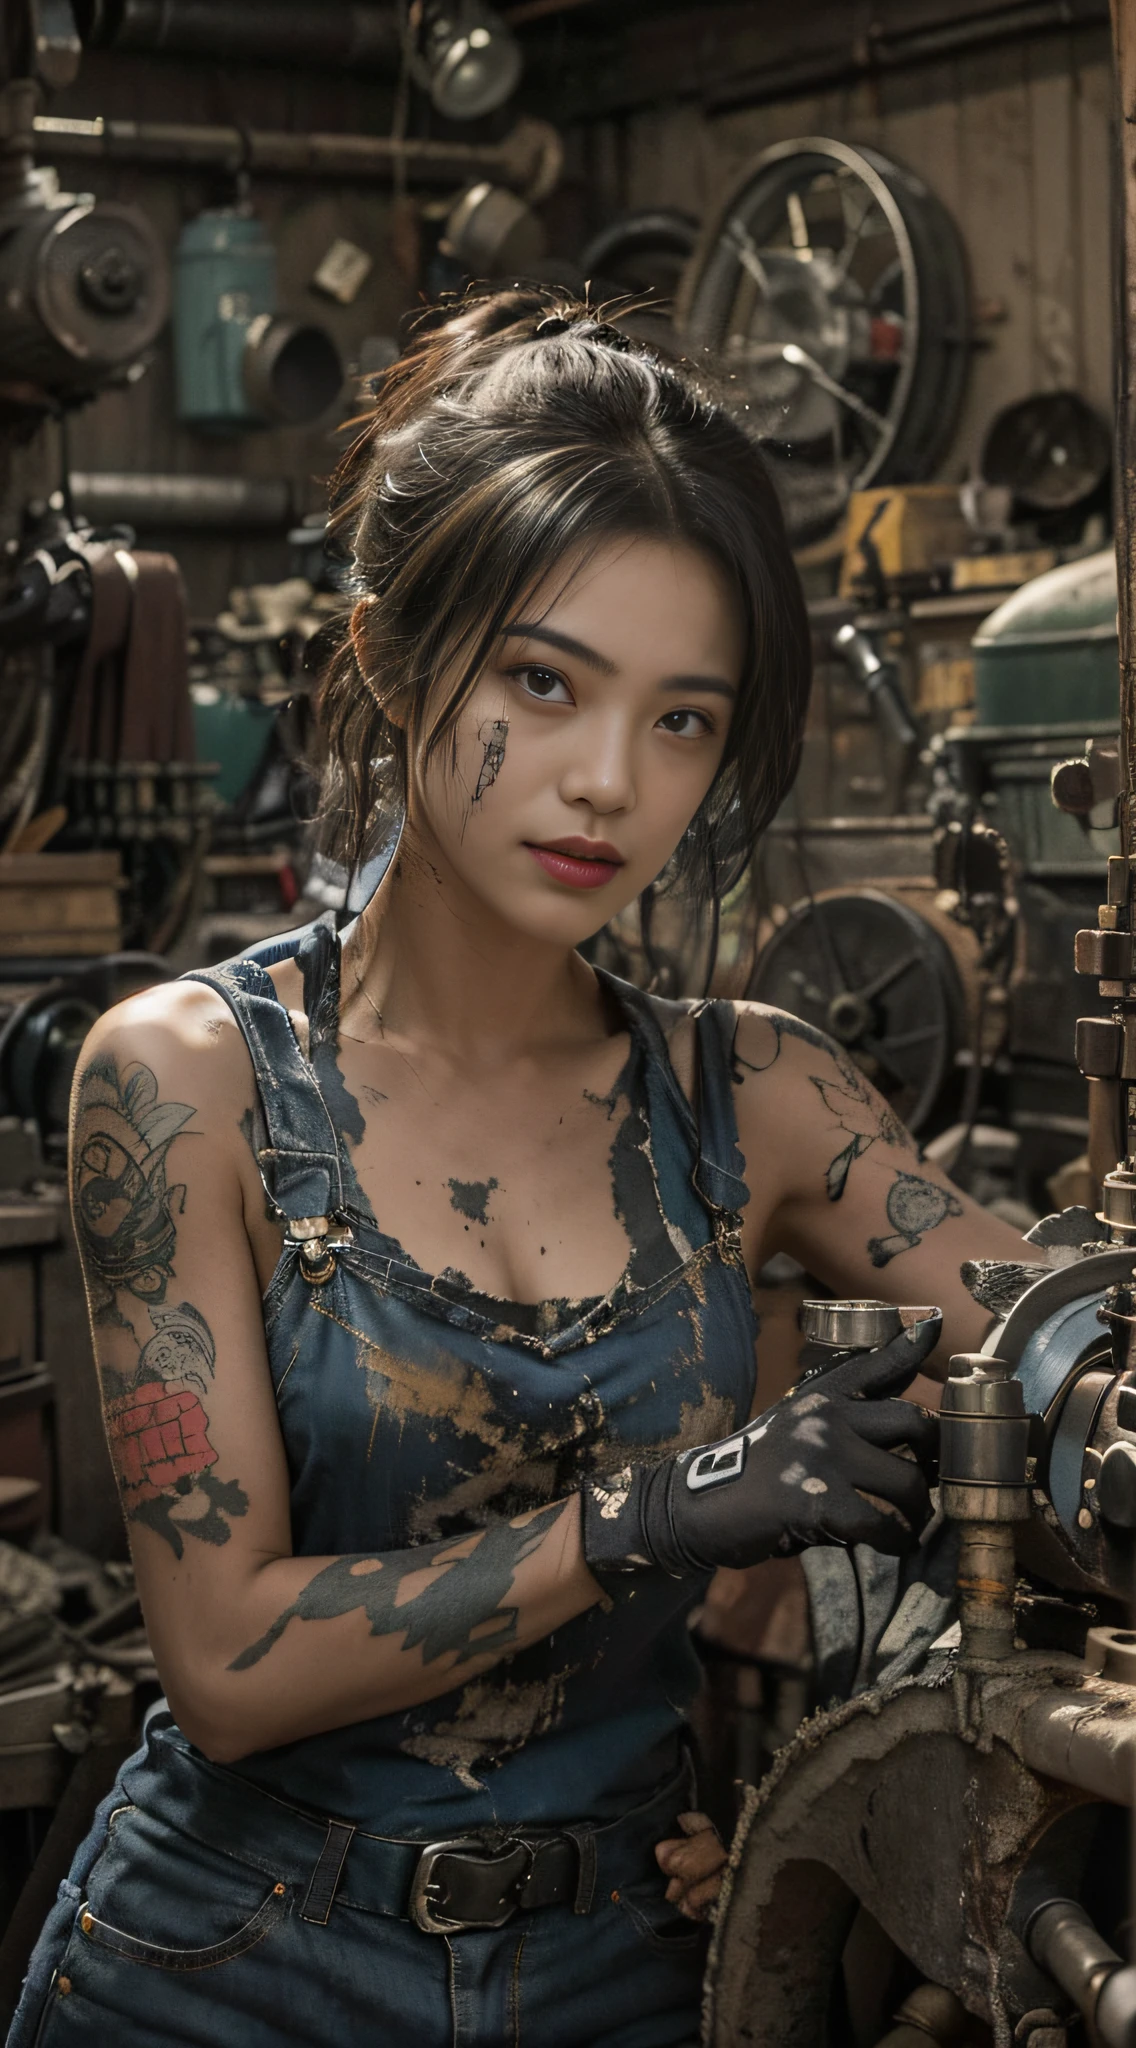 ((best quality)), ((masterpiece)), (detailed), mesmerizing and alluring female mechanic covered in grease,Confident smile，Look into the camera，(Dirty and rugged charm:1.2), (tough and confident demeanor:1.1), (mechanical expertise:1.3), disheveled hair, smudged face with a playful smirk, stained overalls clinging to her curves, (gritty tools of the trade:1.2), cluttered repair shop, scattered car parts, (authentic automotive ambiance:1.2), (intense gaze:1.1), gripping a wrench in her dirty hands, 8k resolution,looking at another, looking away,( tattoo:1.2), masterpiece, best quality,Photorealistic, ultra-high resolution, photographic light